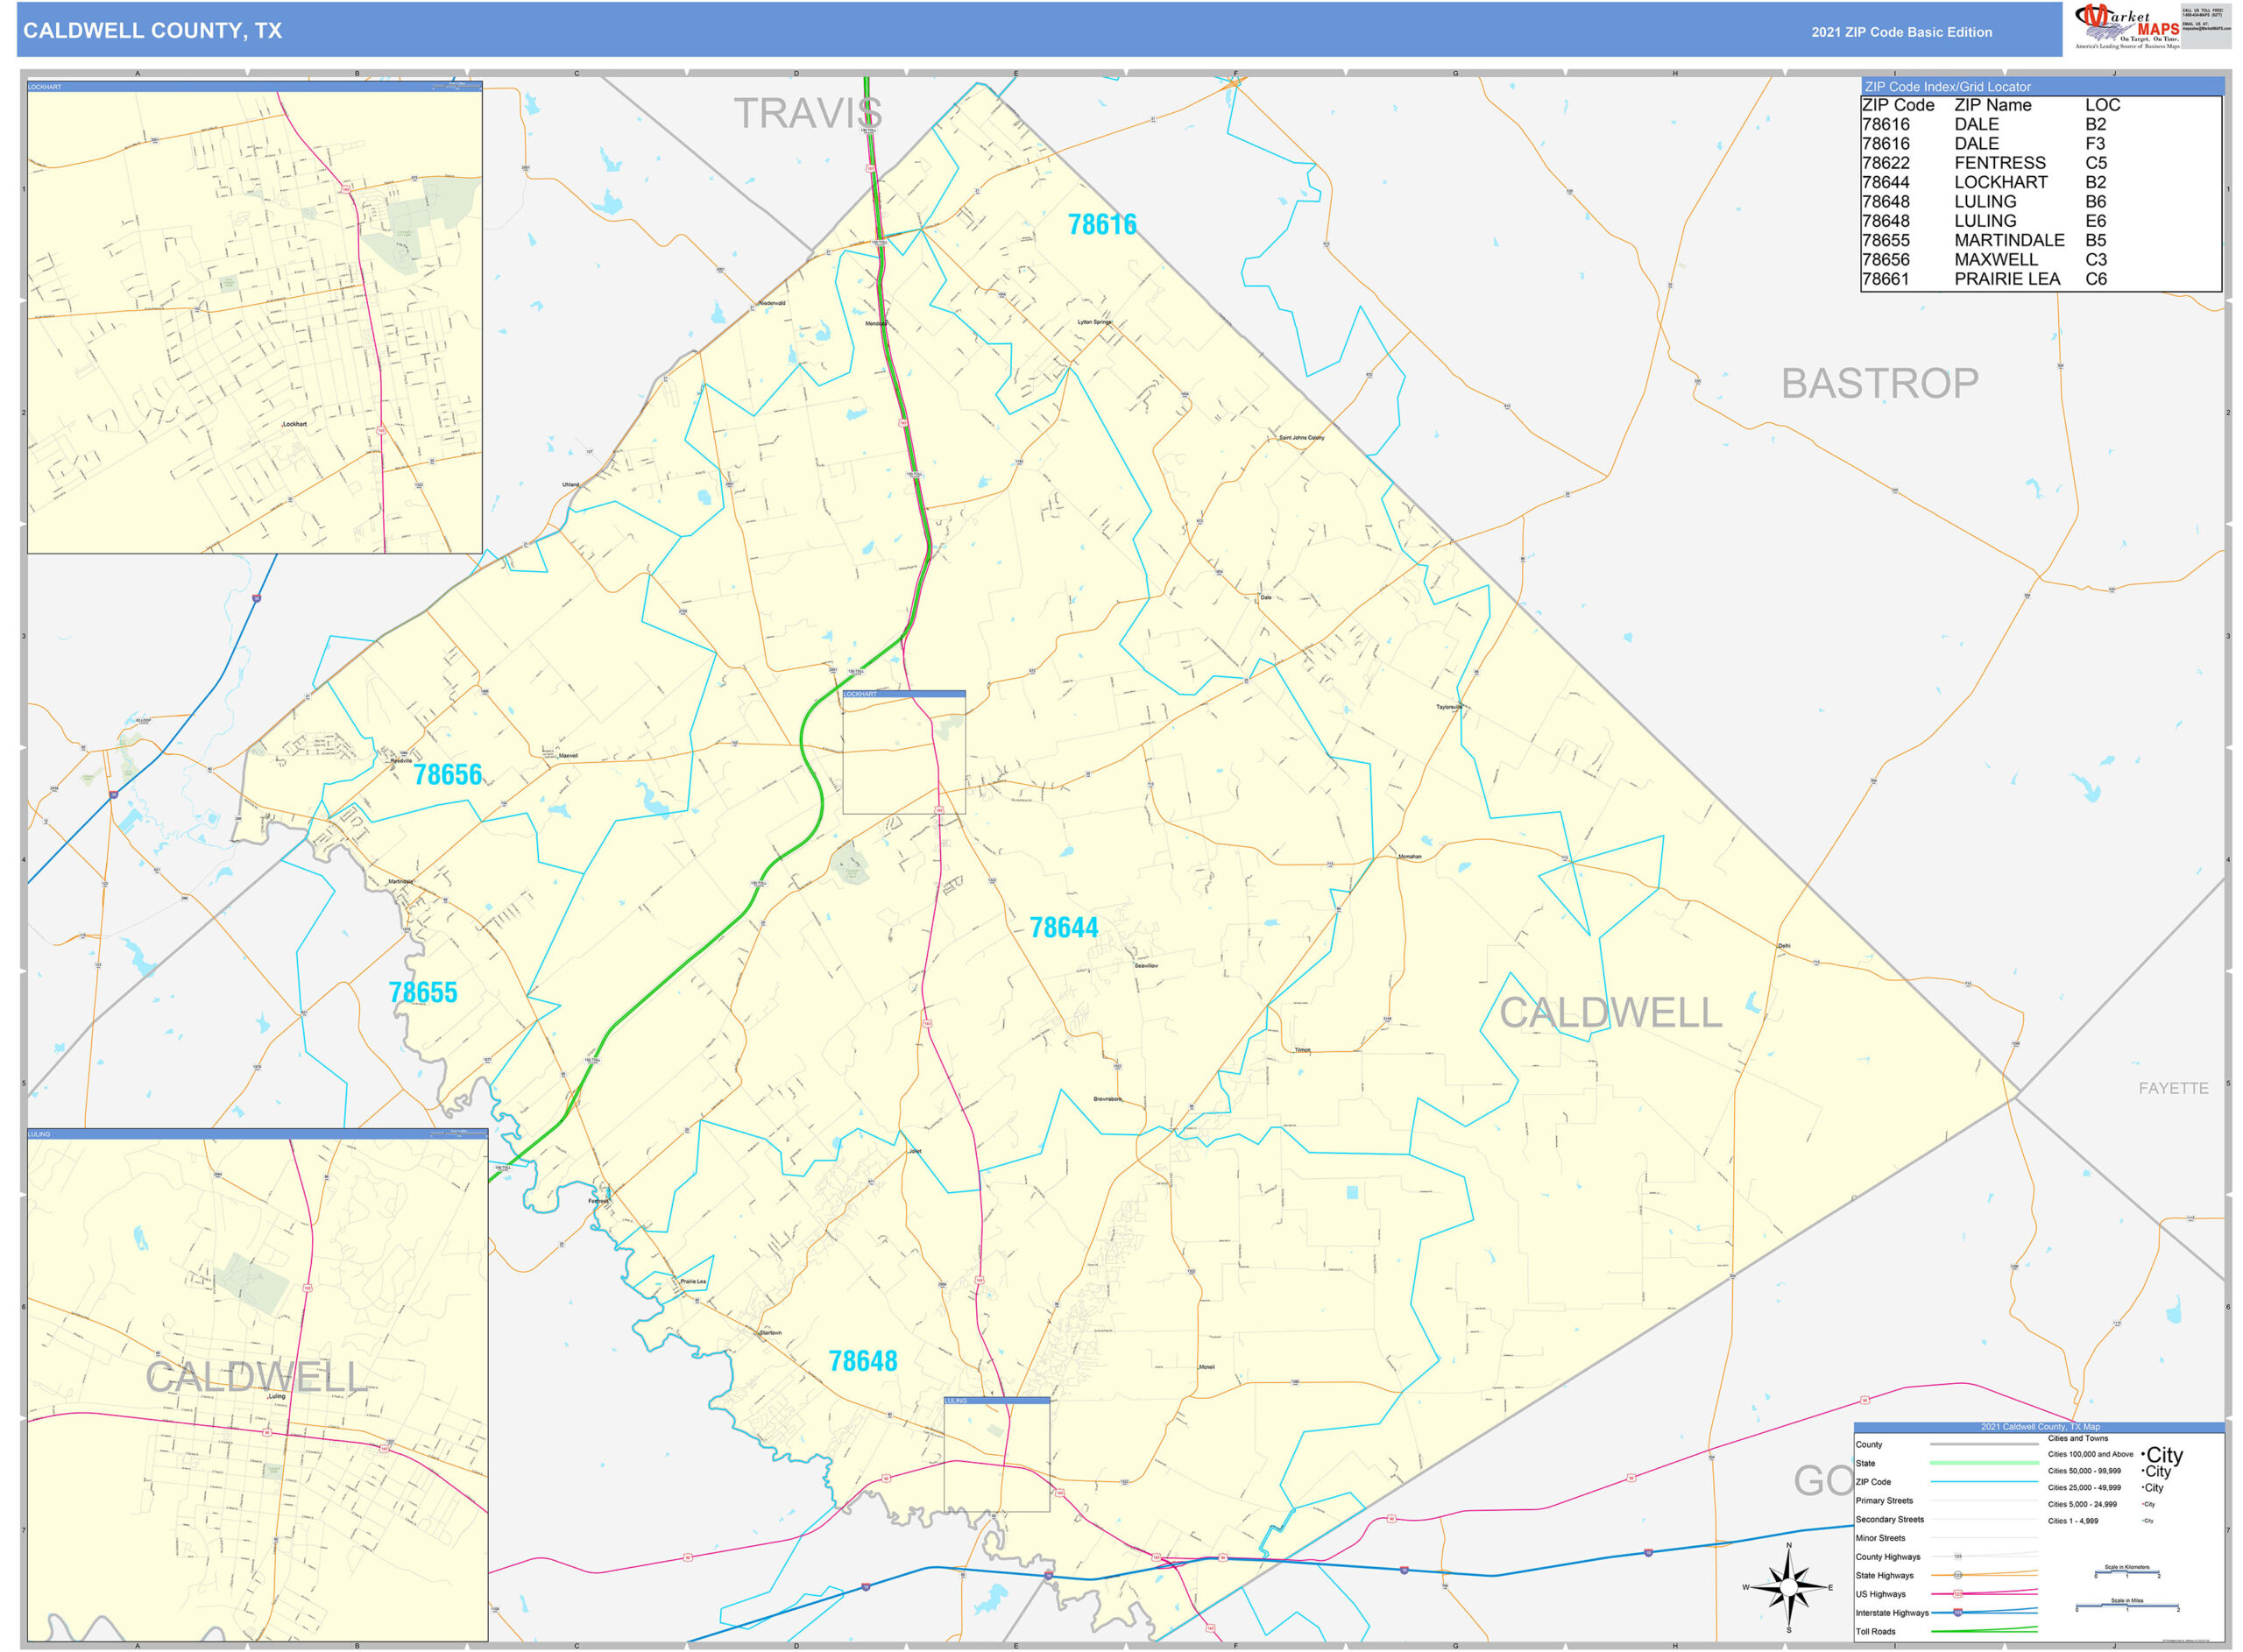 Caldwell County TX Zip Code Wall Map Basic Style By MarketMAPS